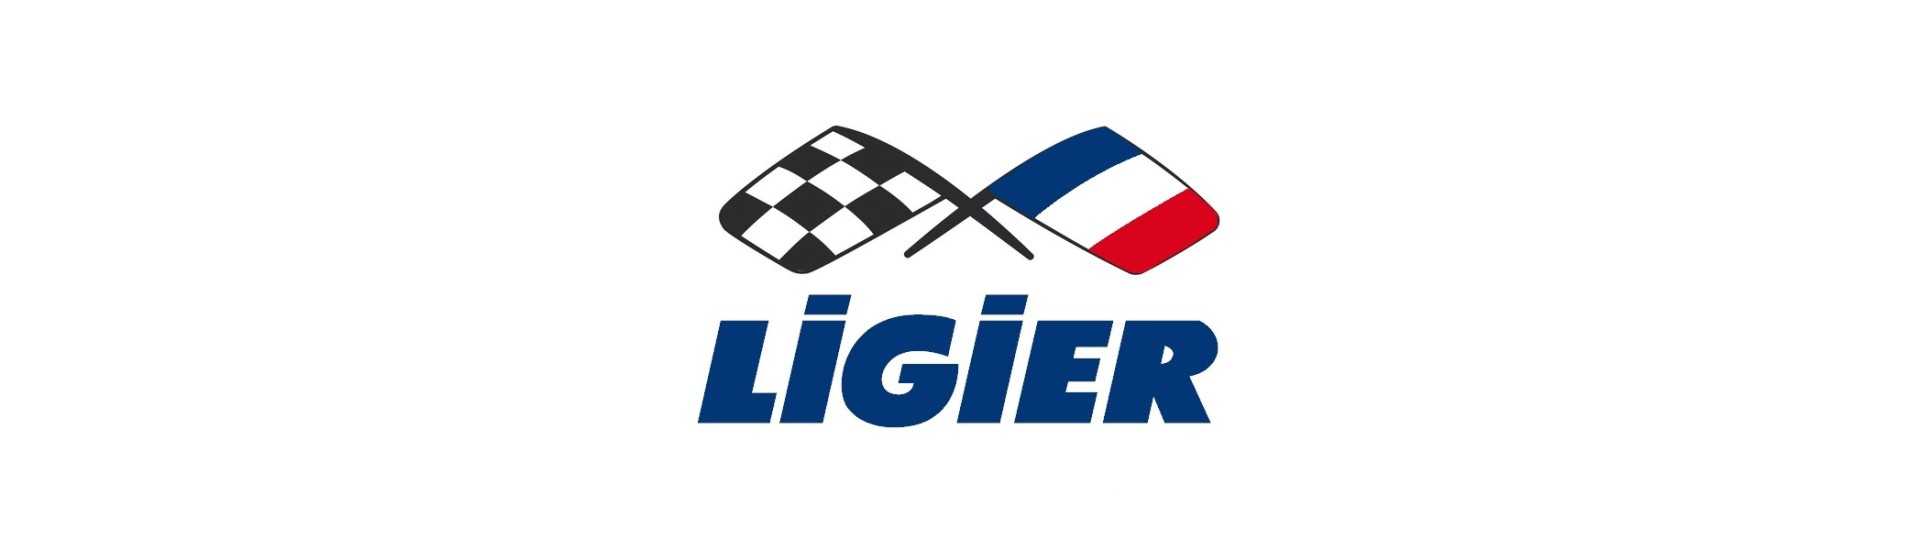 Wheel pack at the best price for cars without a license Ligier